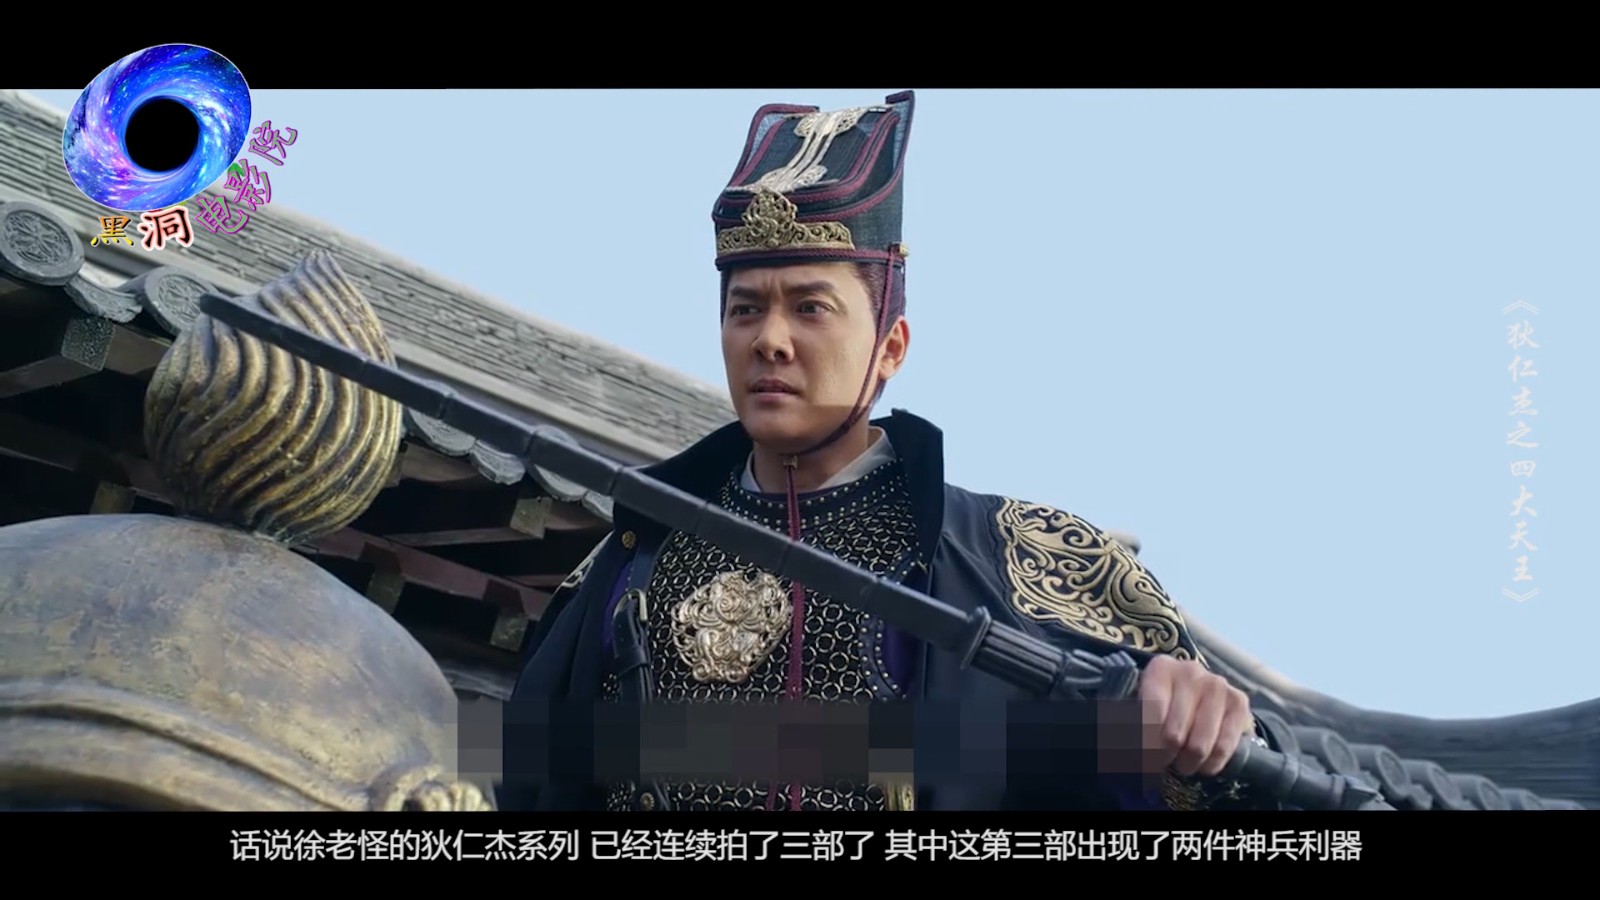 Which of the four heavenly kings of Di Renjie, Kang Longzhao and Magic Wheel, ranks first in the weapons list?